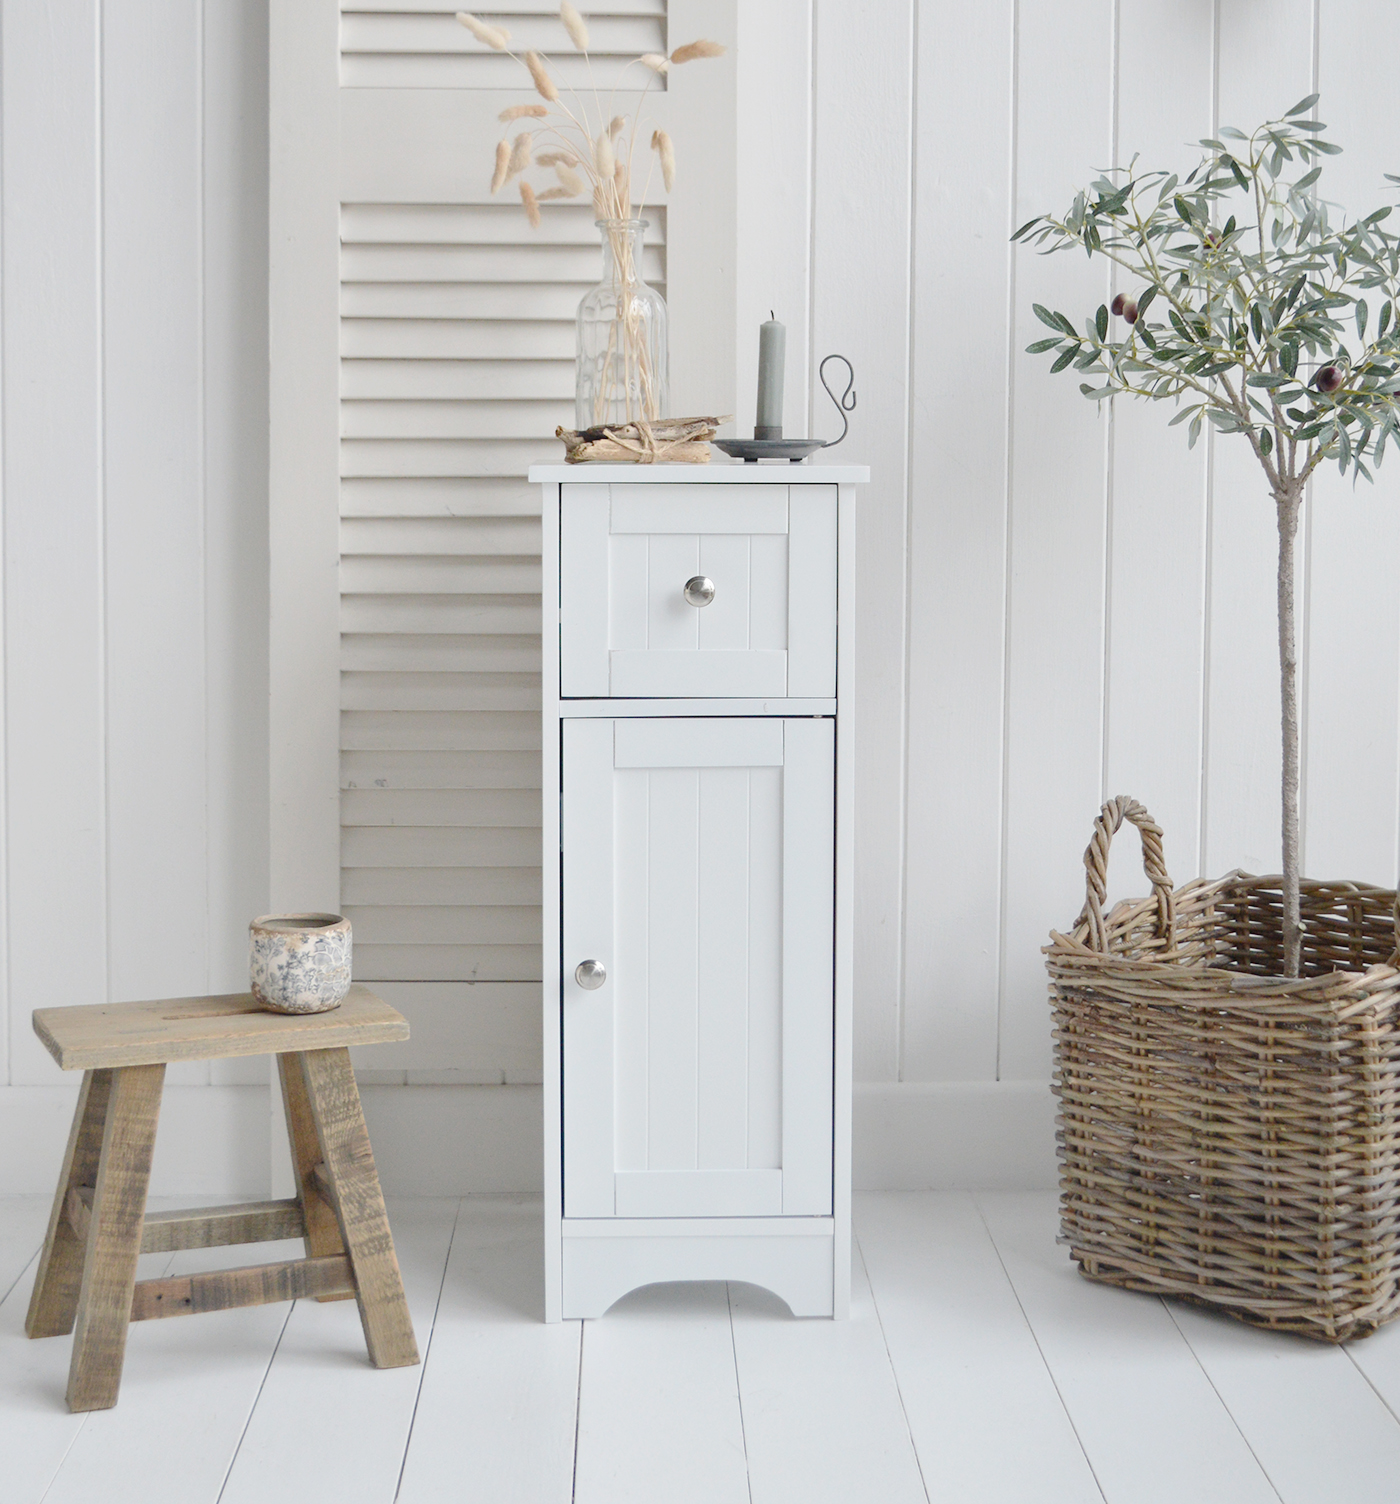 Dorset slim bedside table in white with a drawer and cupboard for storage for New England style white bedroom furniture